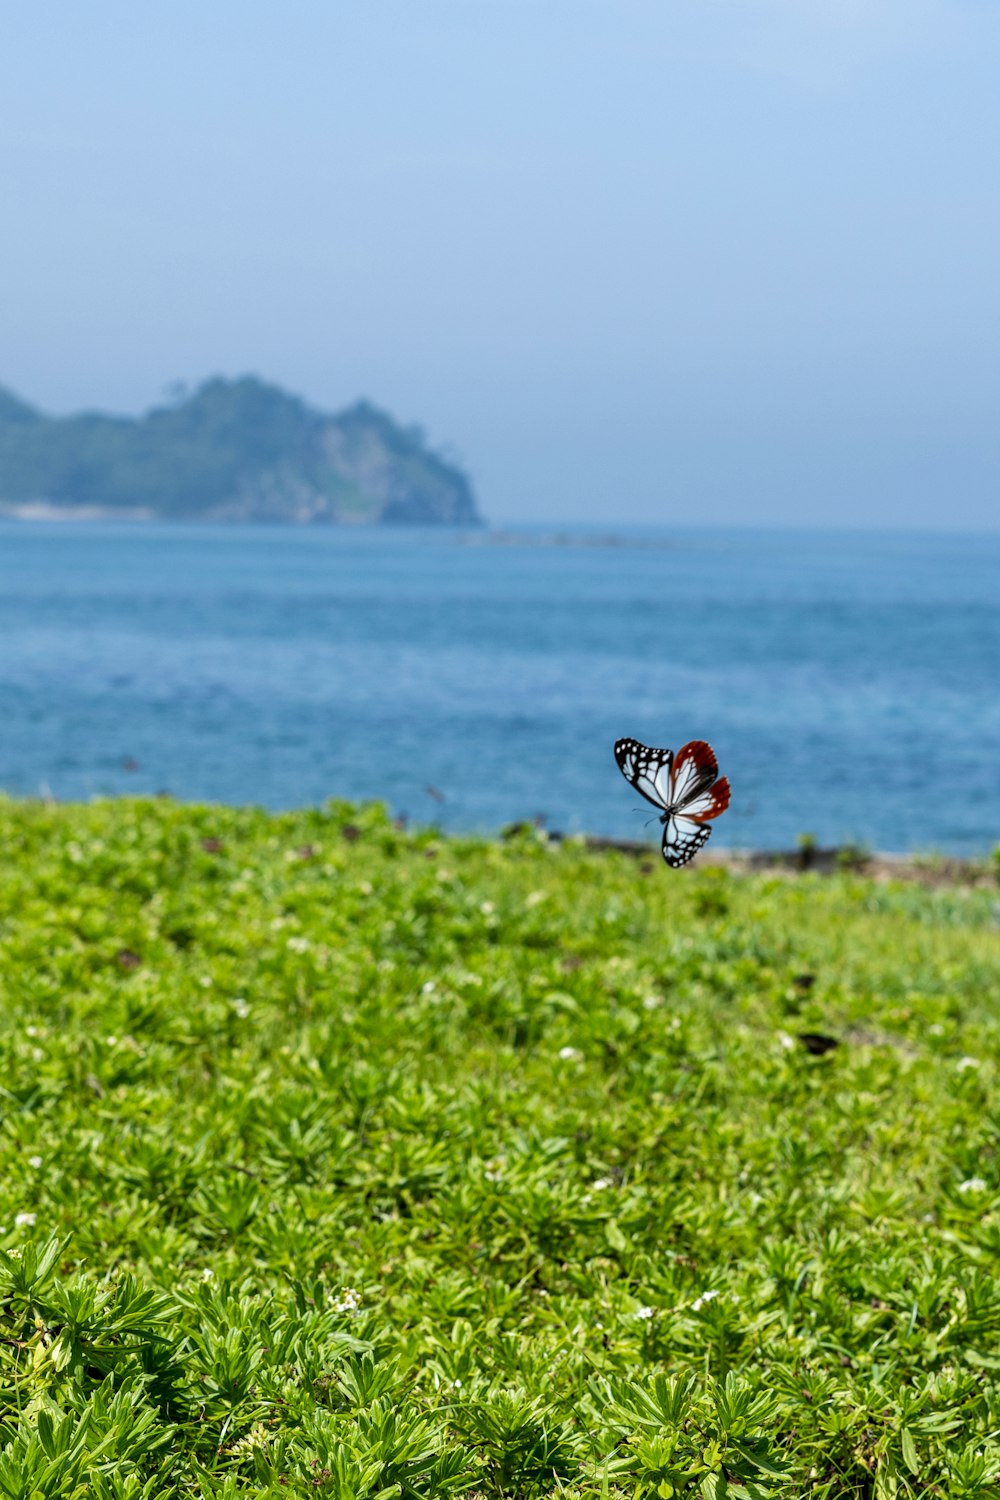 a butterfly flying over a lush green field next to the ocean